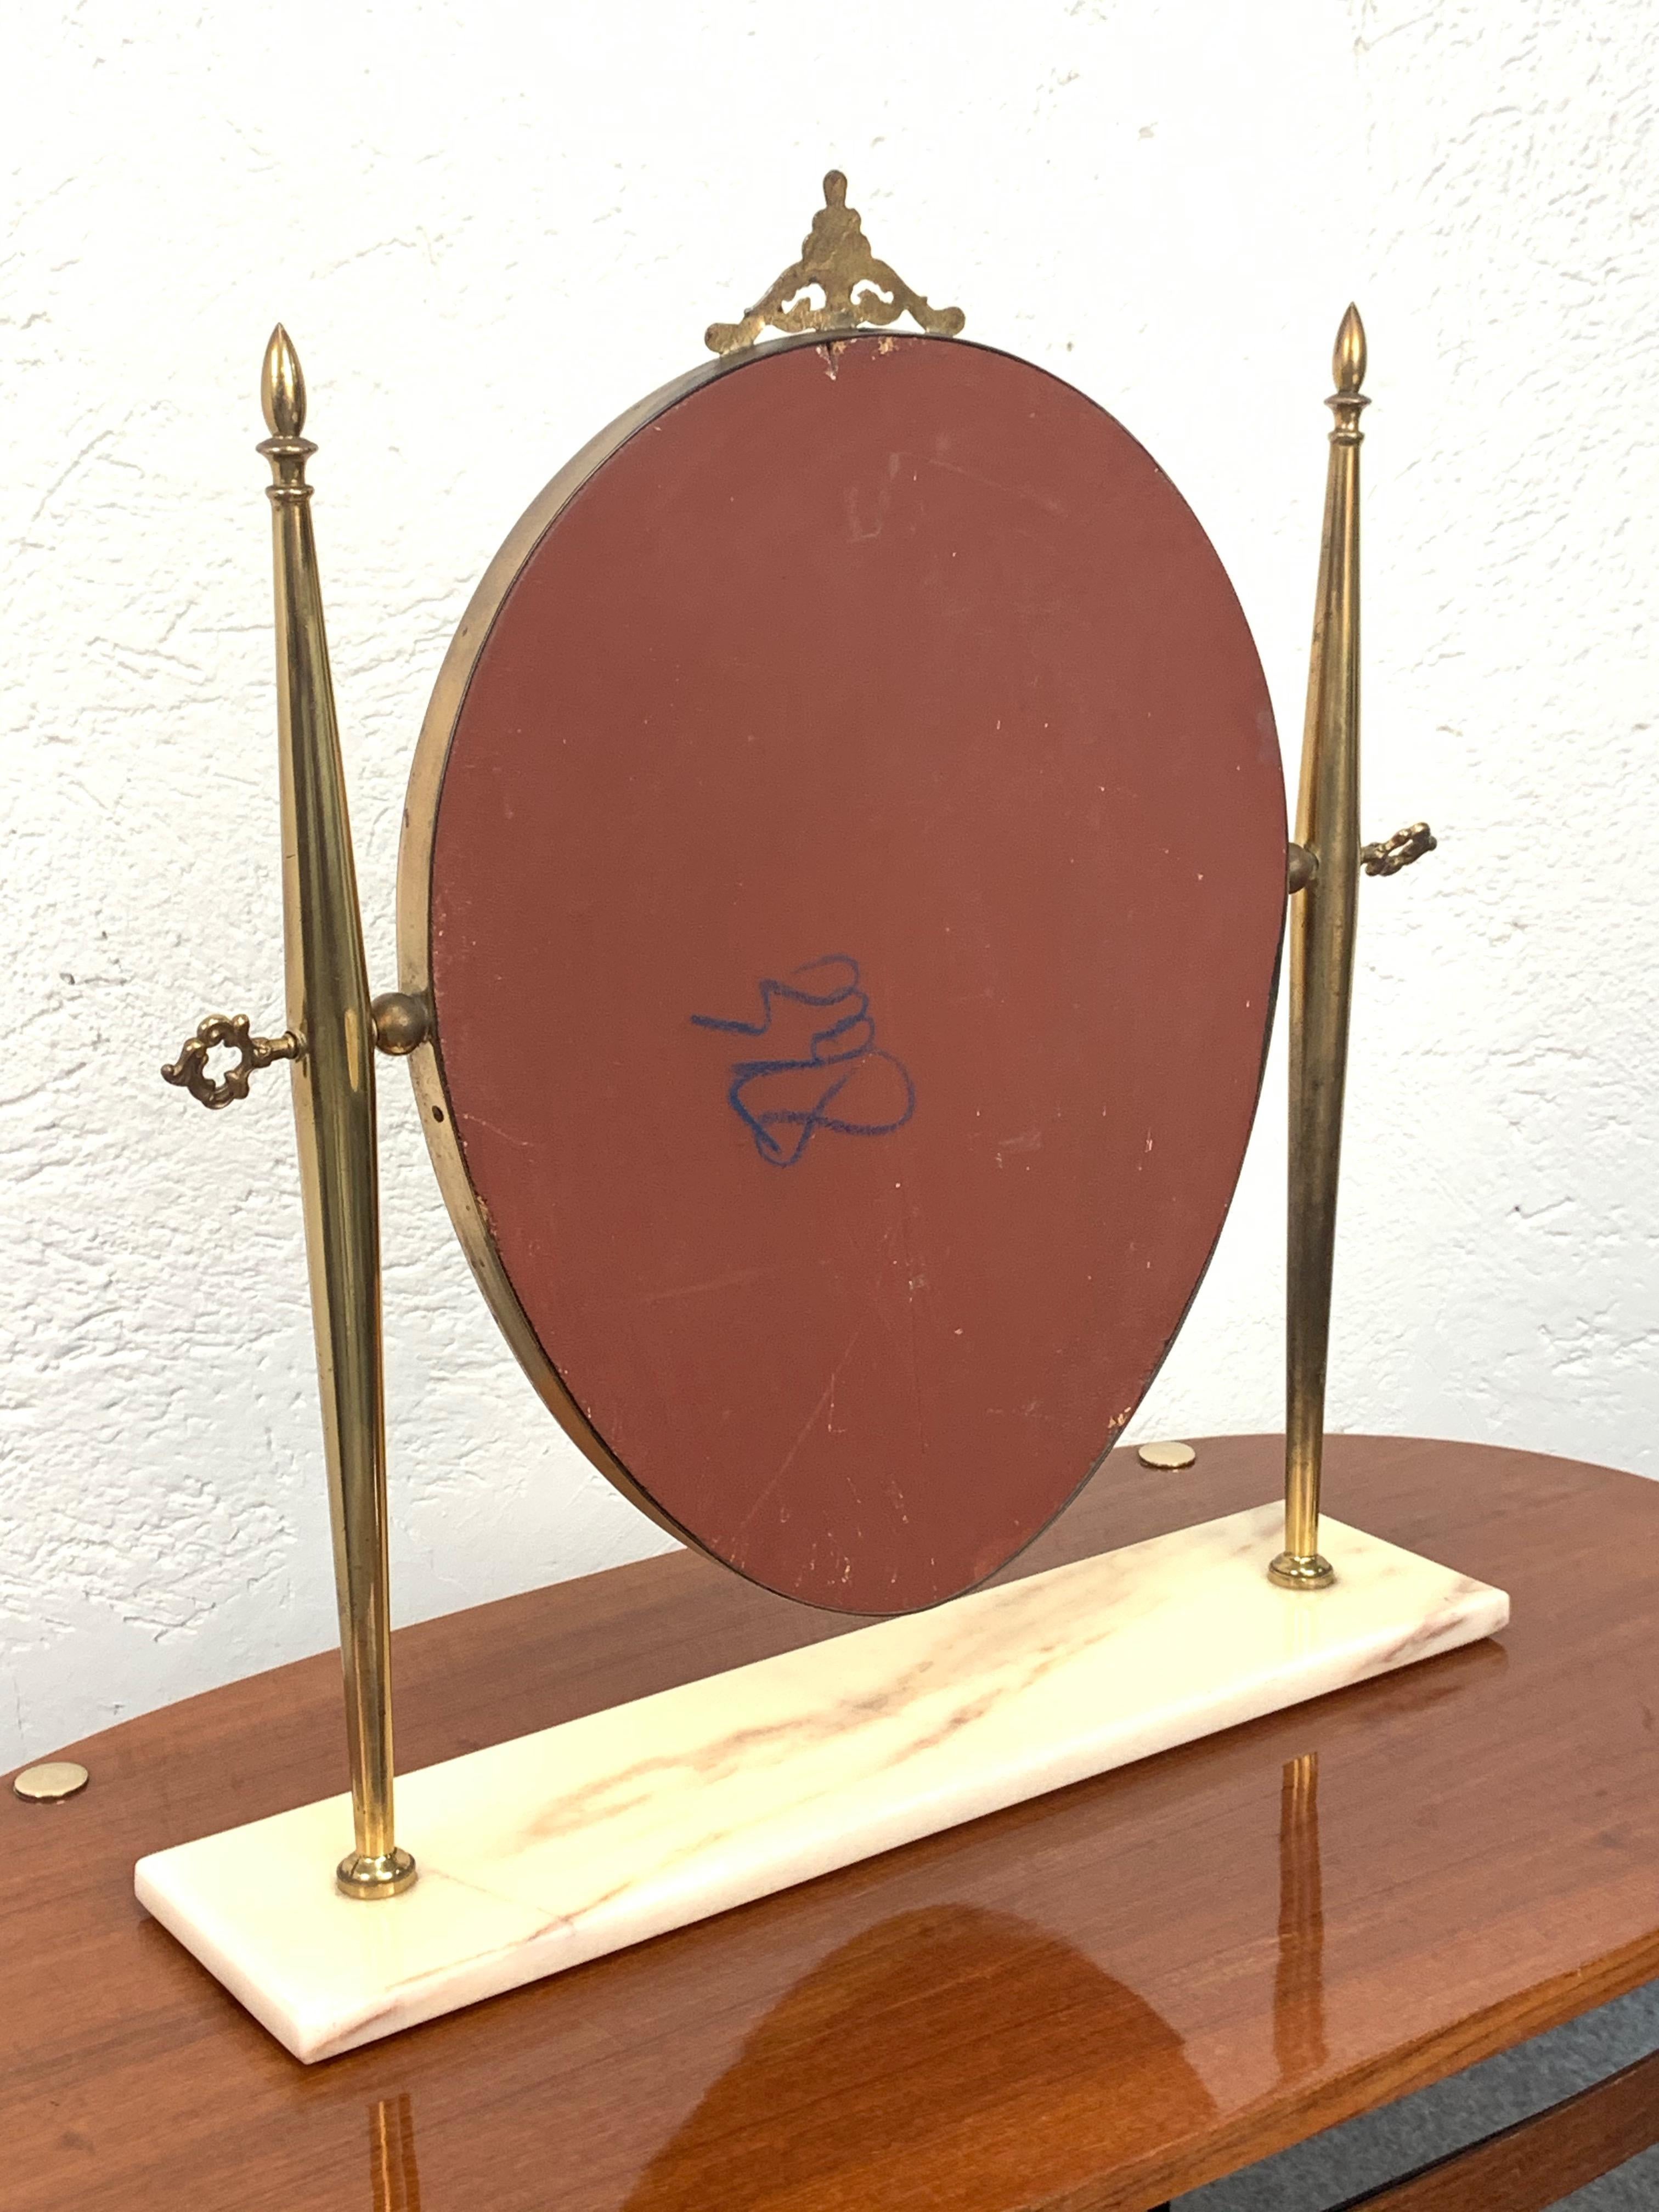 Italian Polished Brass Table Mirror with Marble Adjustable Vanity Base, 1950s For Sale 3